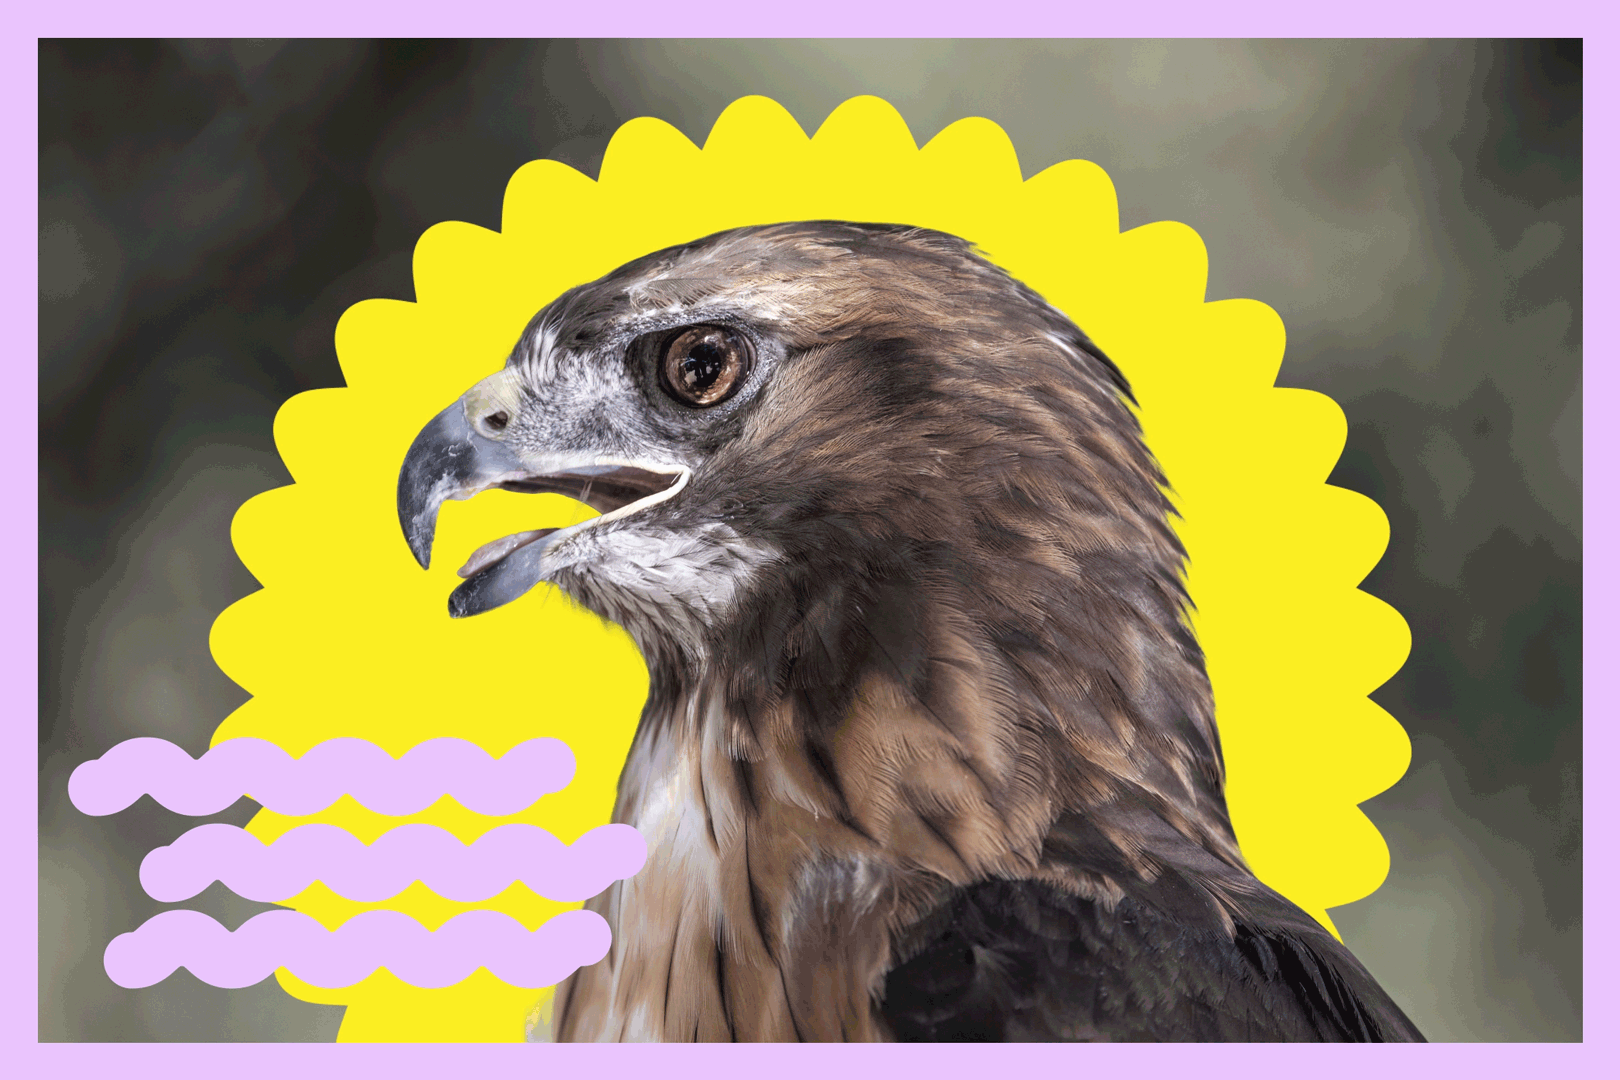 A red-tailed hawk against an animated yellow sun and a few purple squiggly lines.